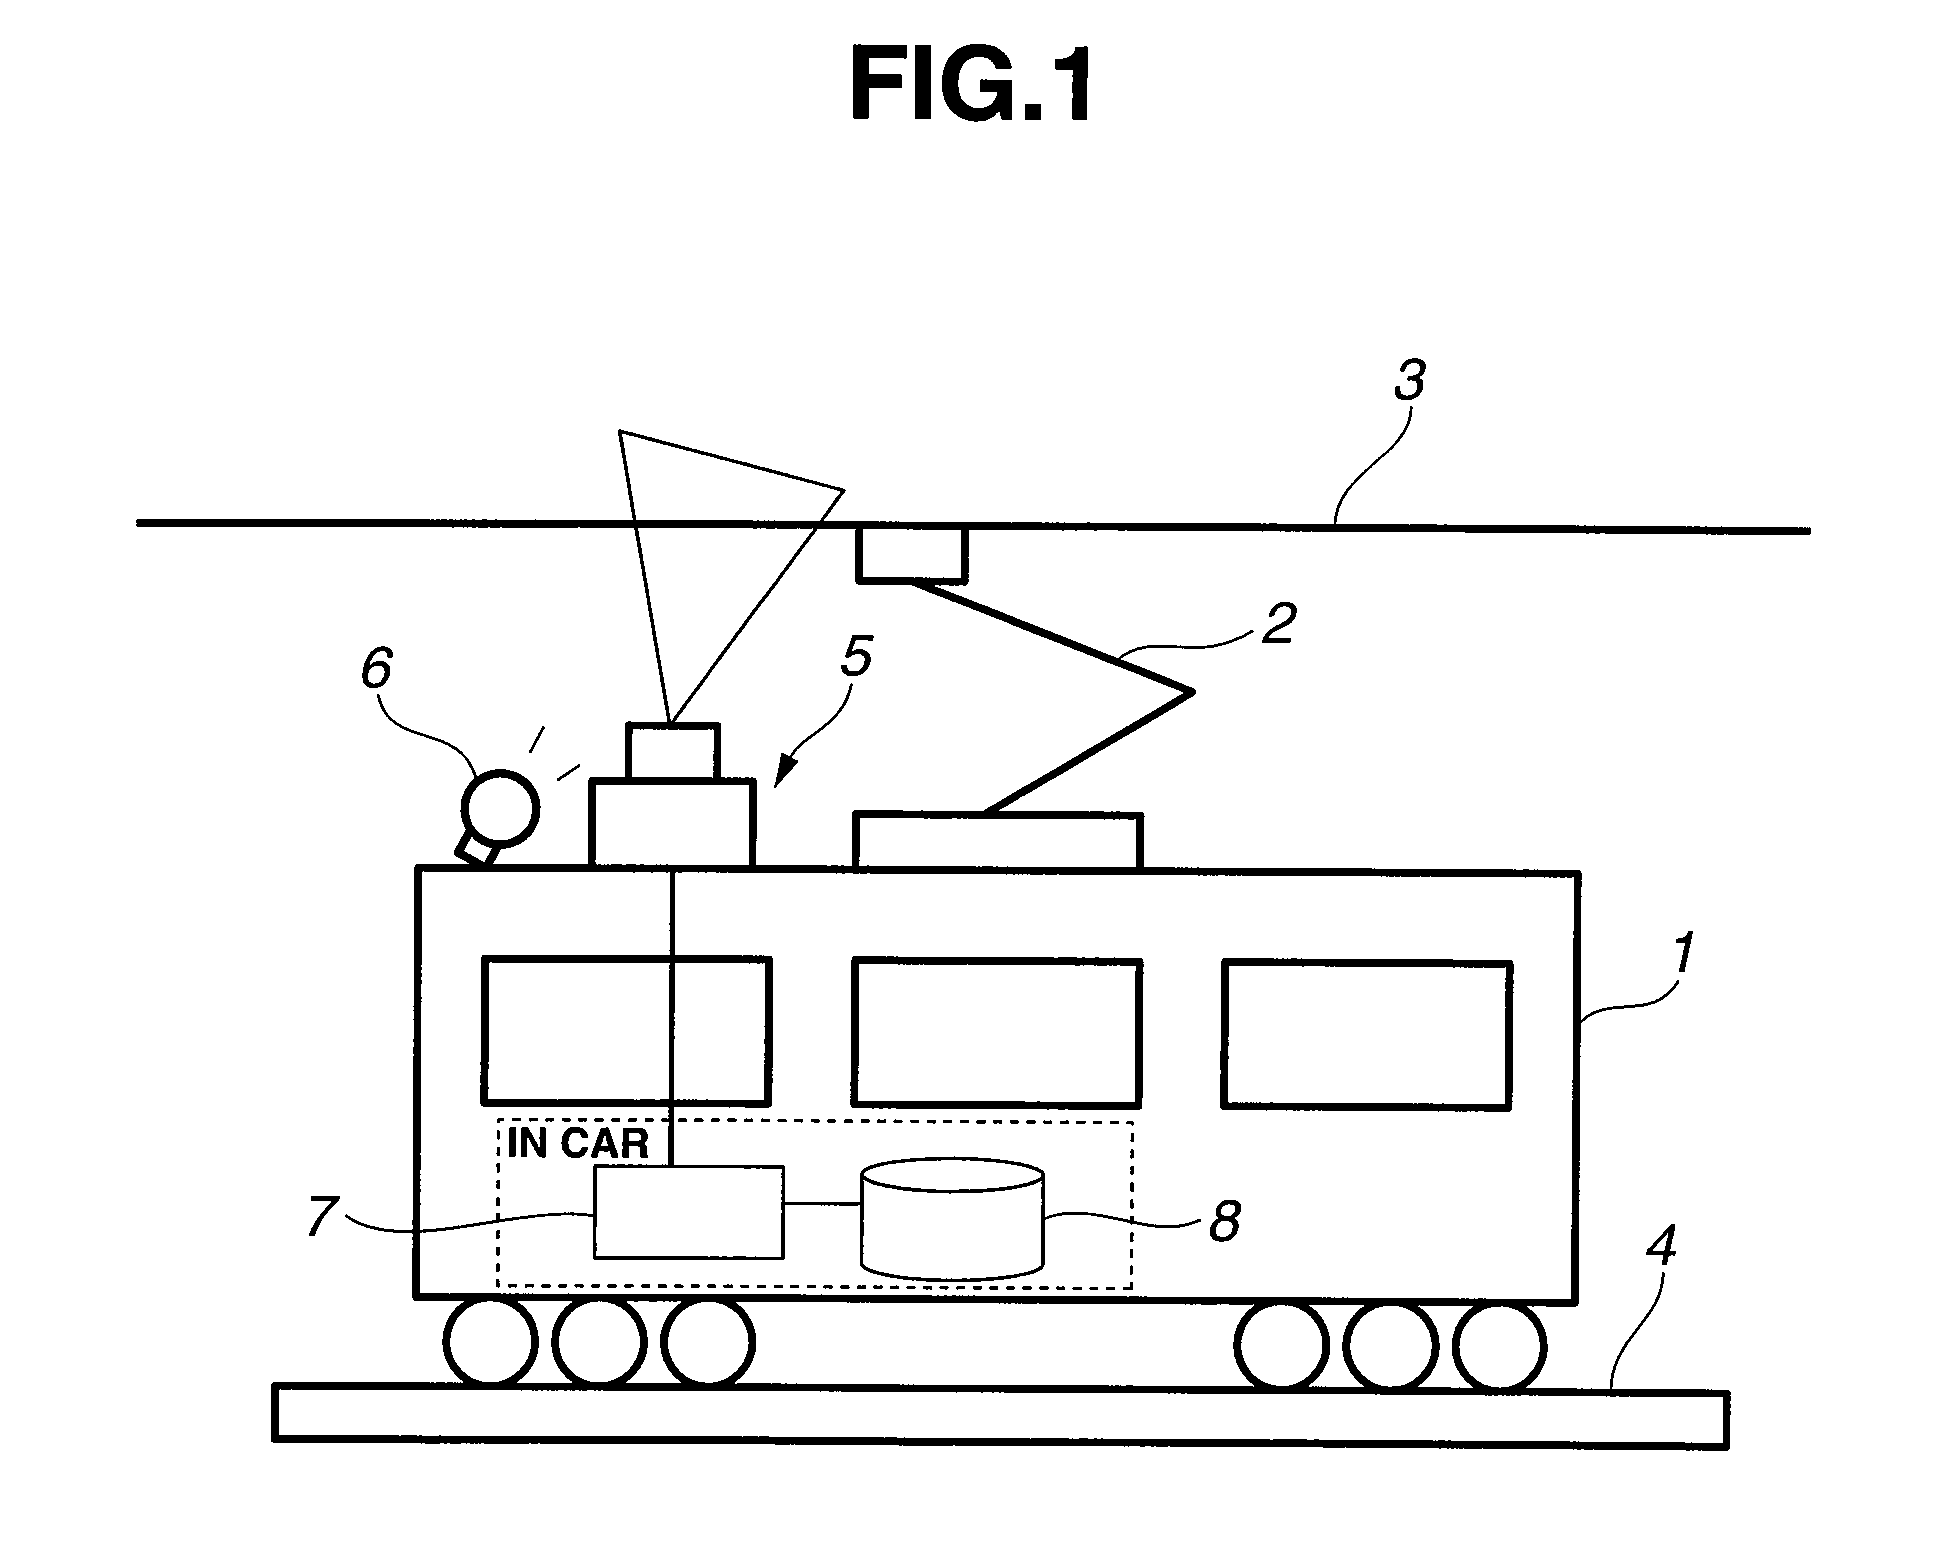 Trolley wire wear measuring device using binary operated images